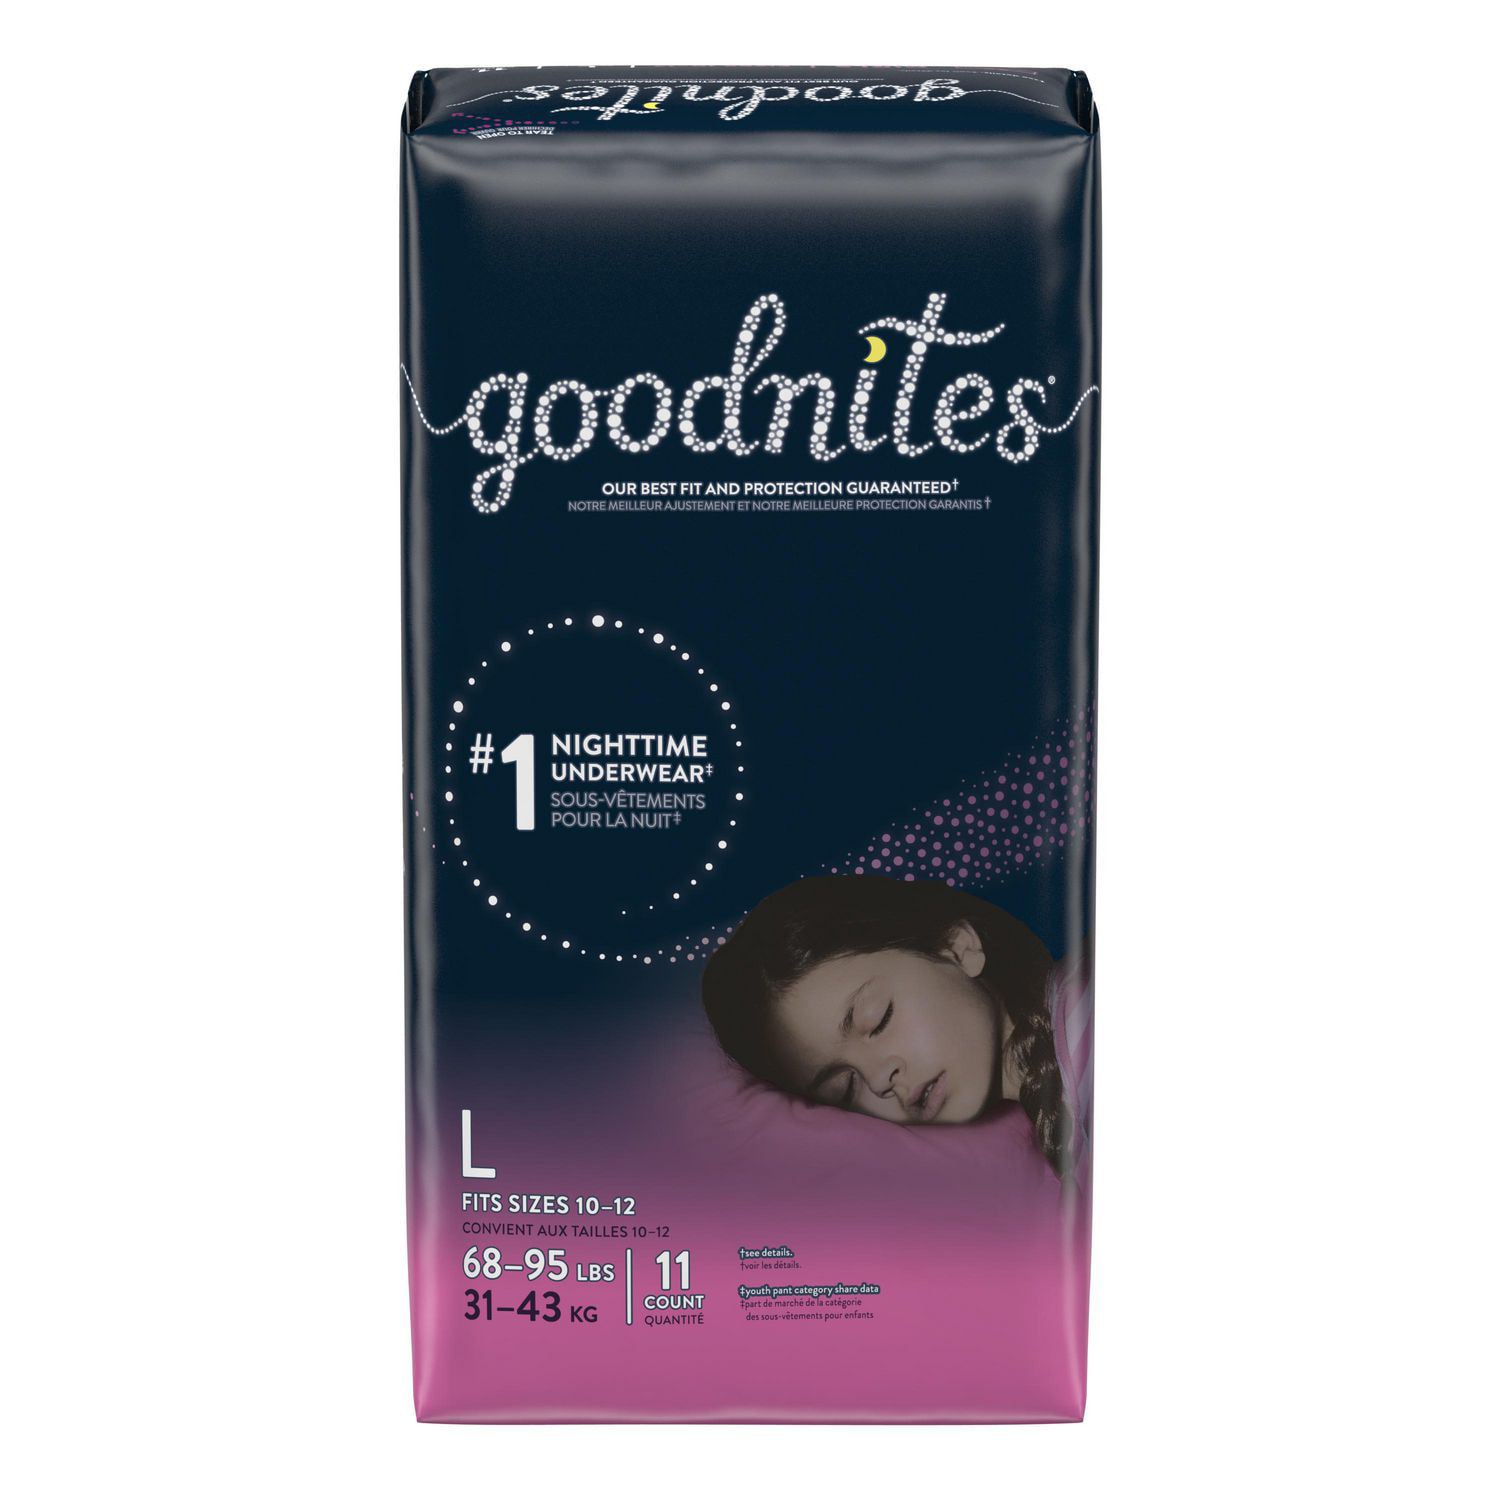 Goodnites Girls' Nighttime Bedwetting Underwear - (select Size And Count) :  Target